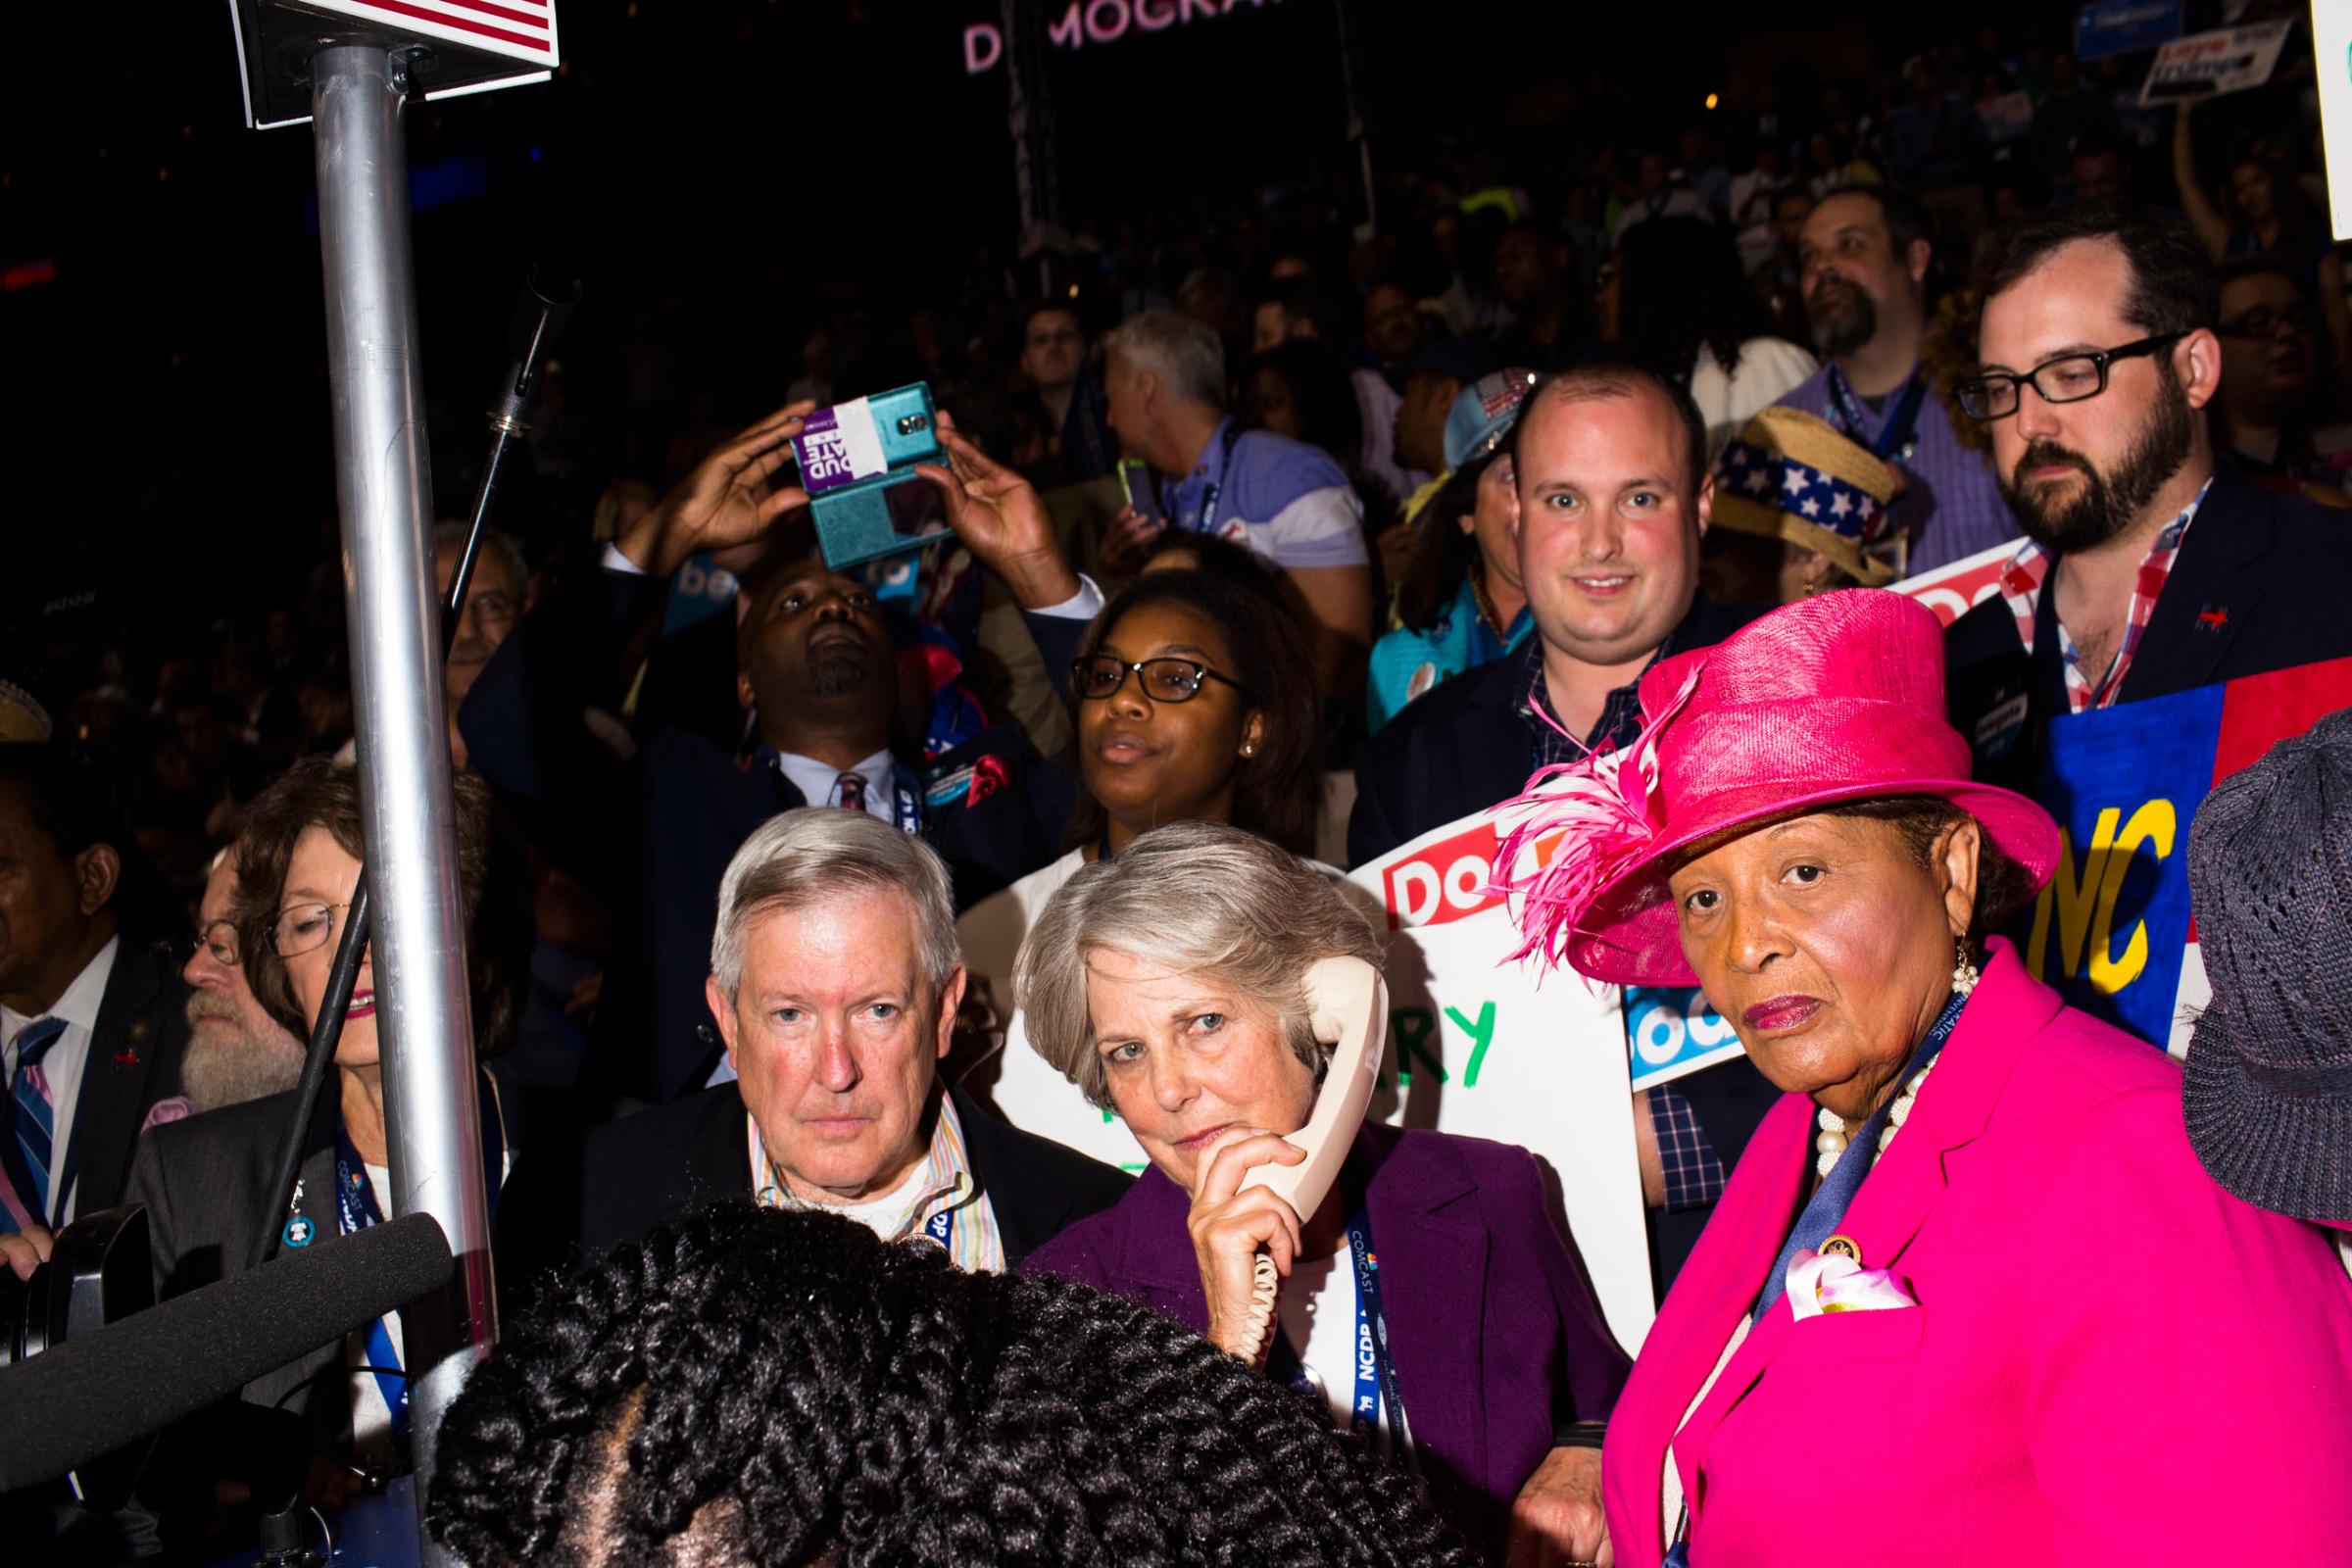 North Carolina Roll Call at the 2016 Democratic National Convention in Philadelphia on Tuesday, July 26, 2016.